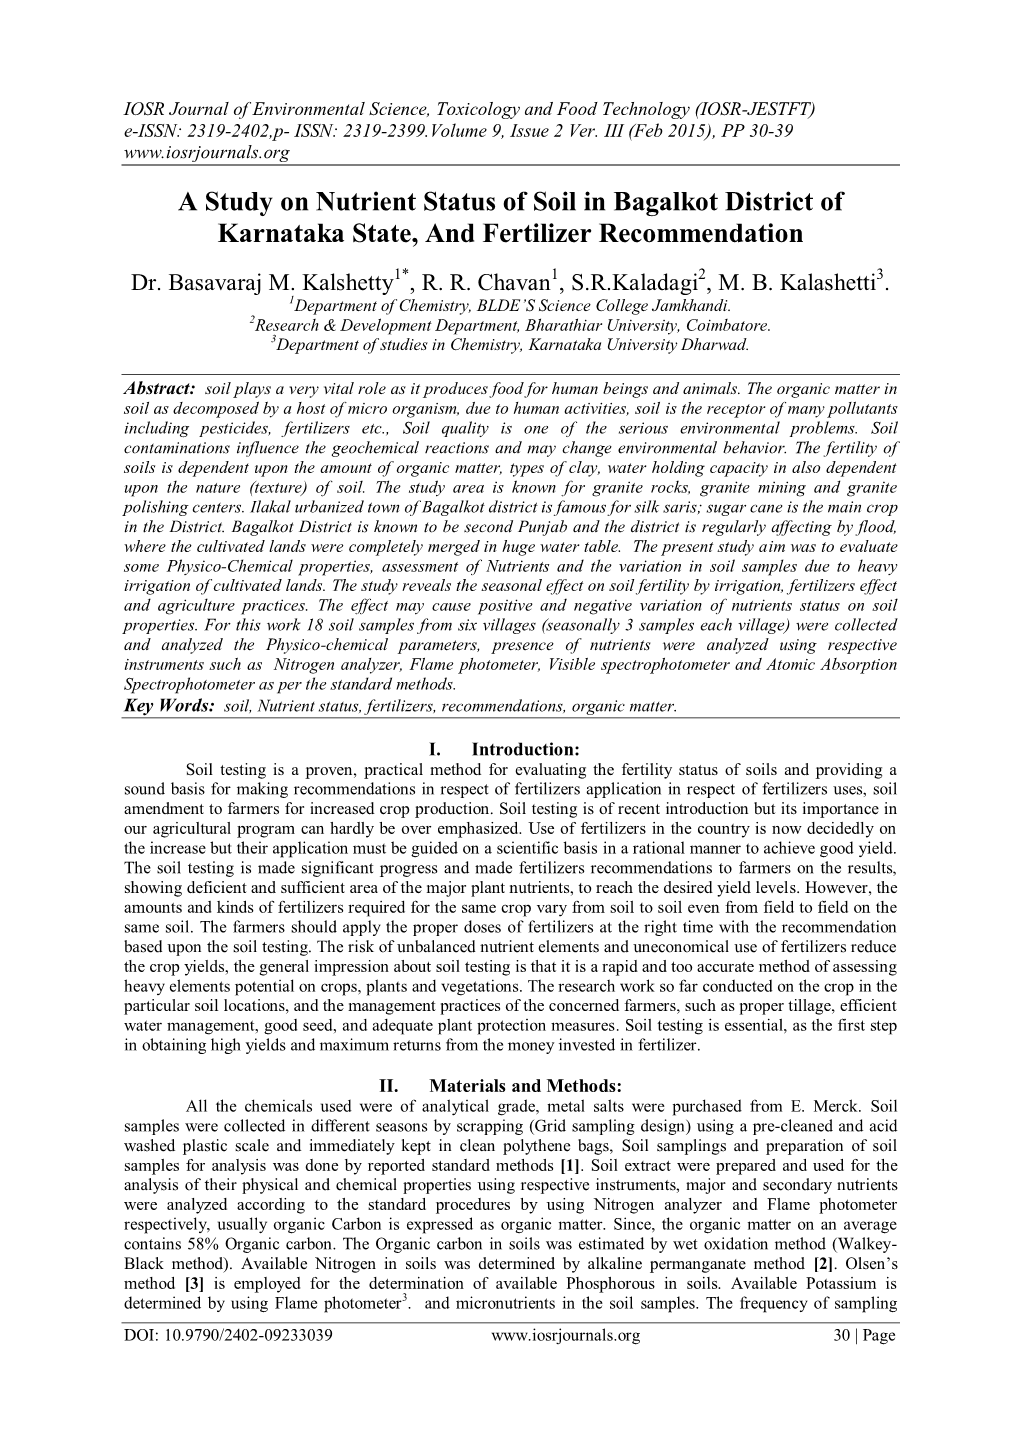 A Study on Nutrient Status of Soil in Bagalkot District of Karnataka State, and Fertilizer Recommendation